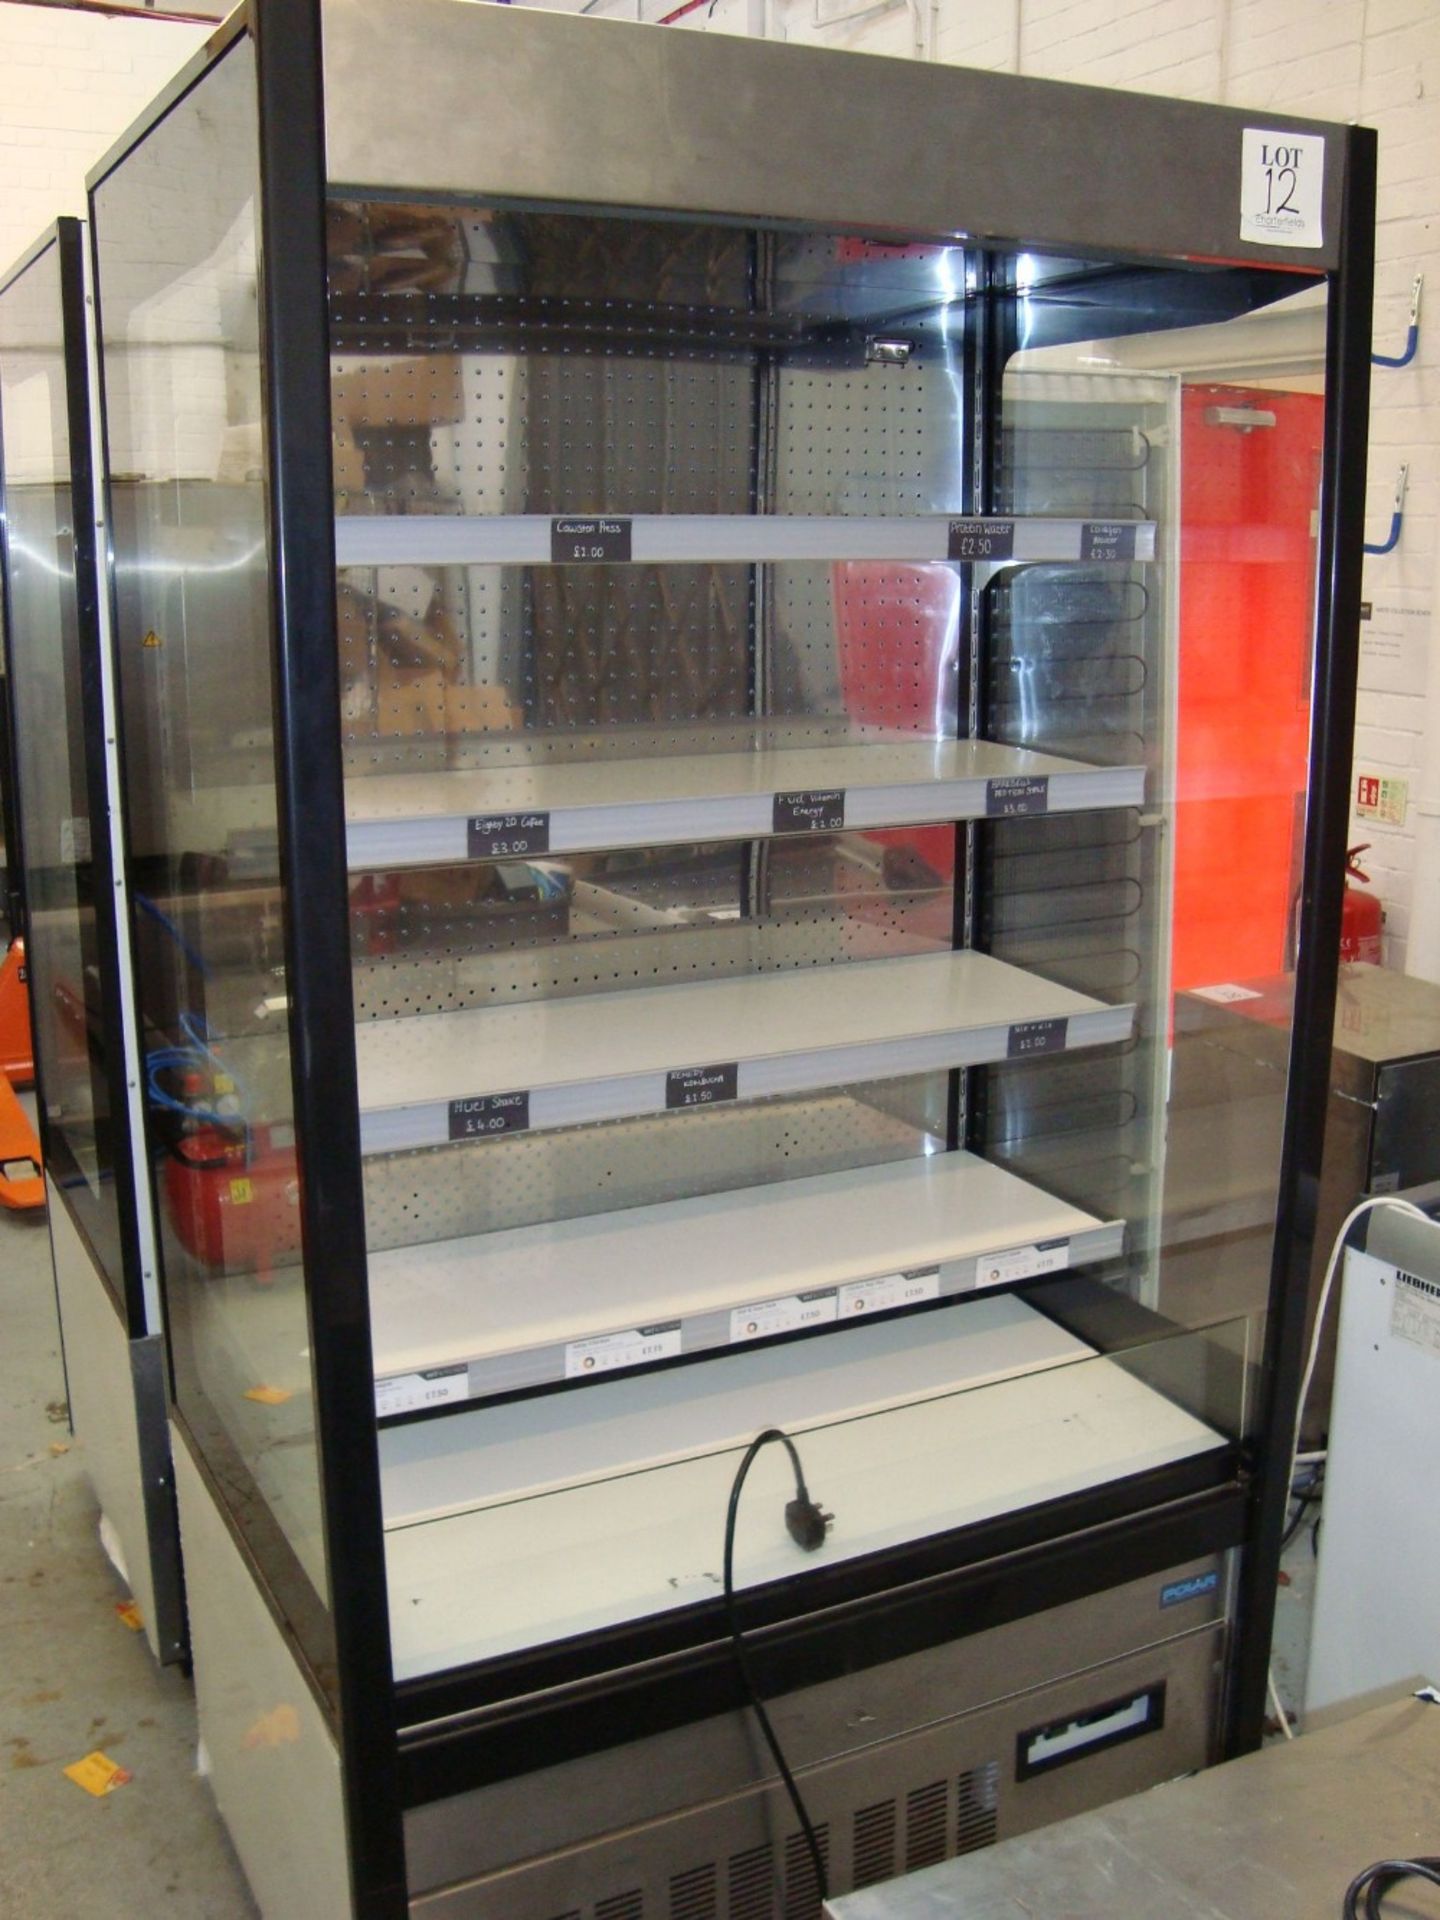 A Polar GH268 chilled display shelving unit Serial No. 6266618